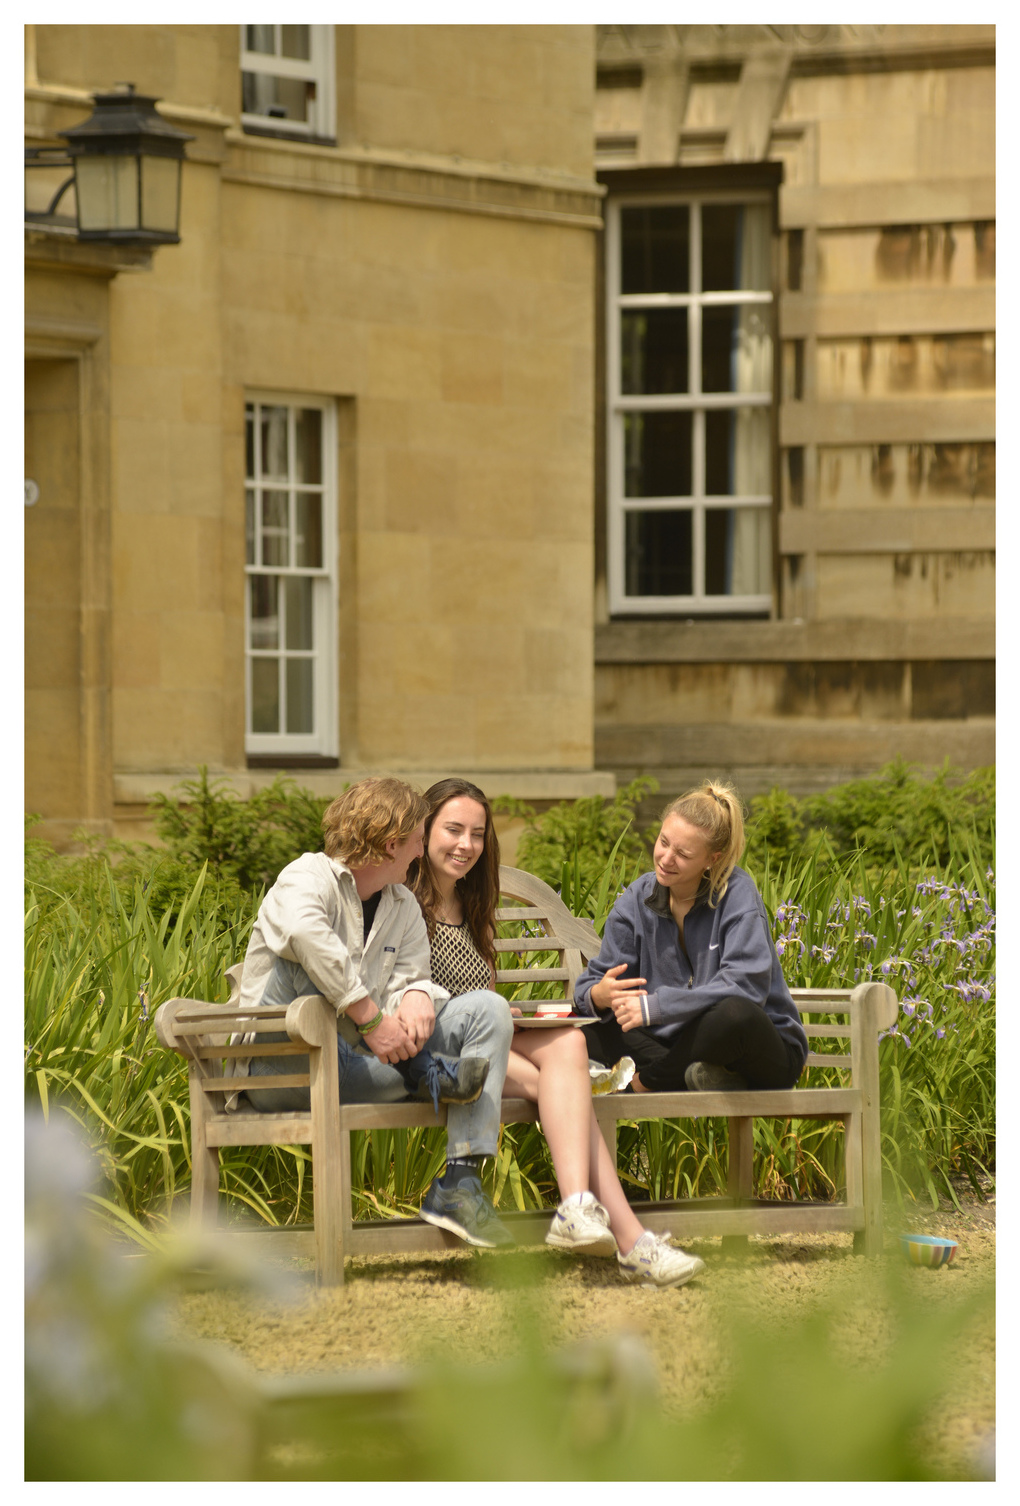 Students in Third Court at Christ's College, Cambridge